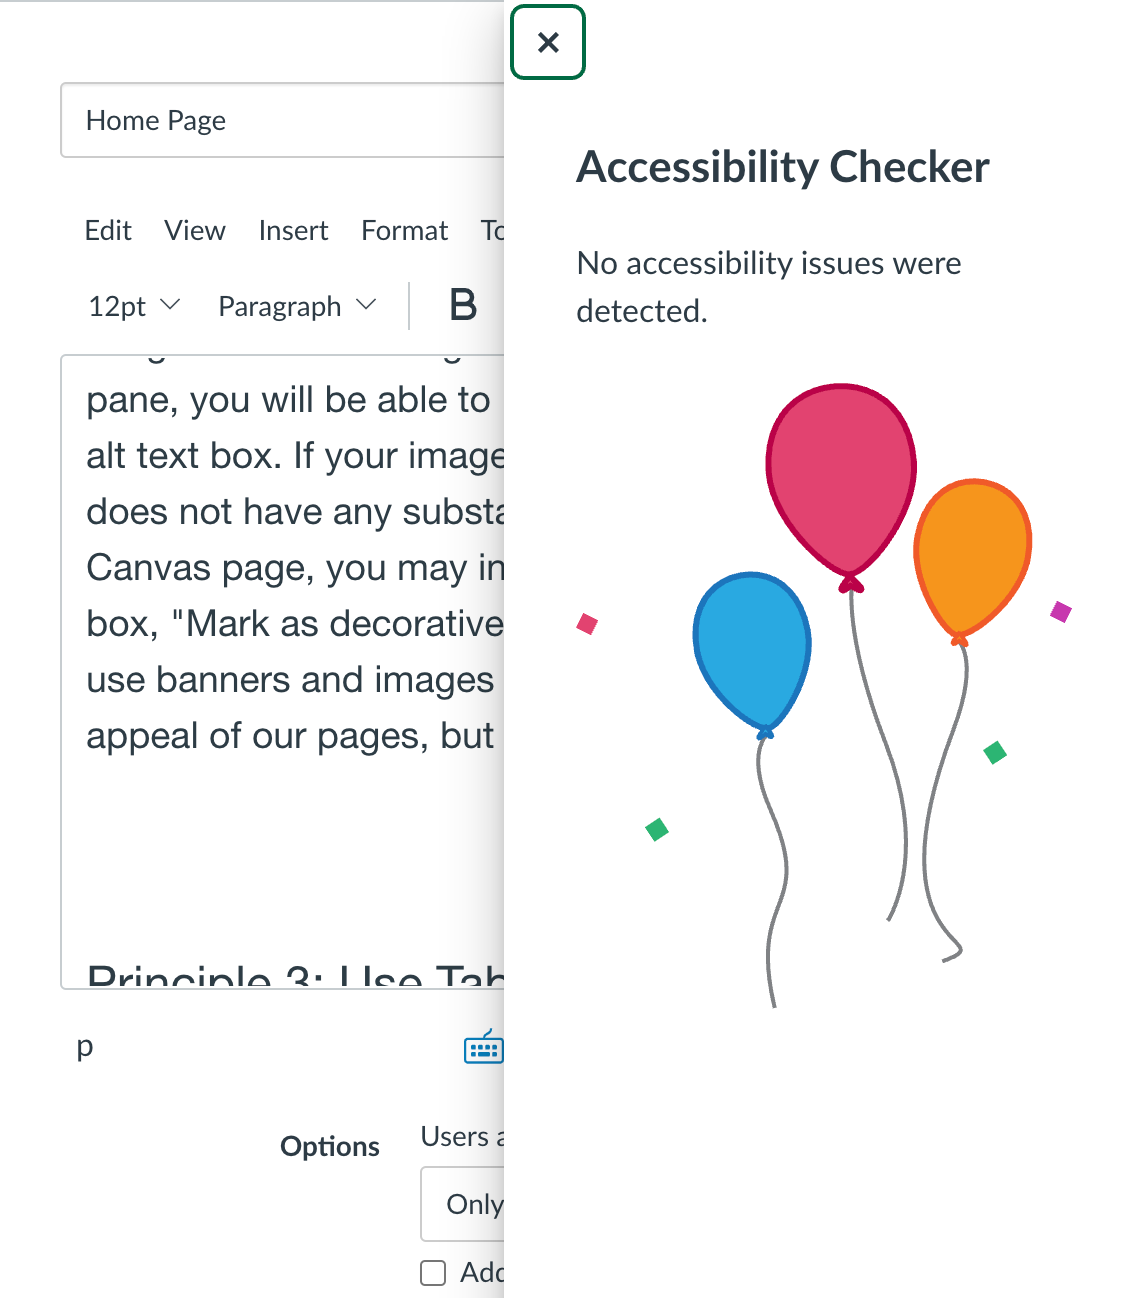 showing accessibility checker was successful